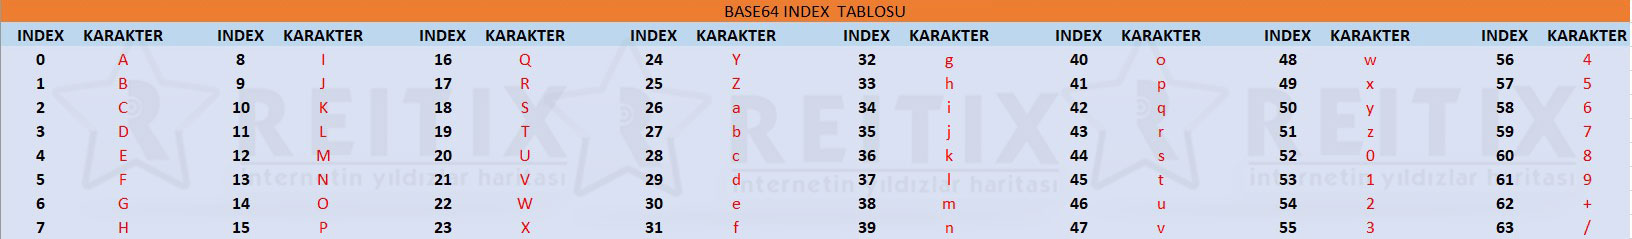 base64 index table